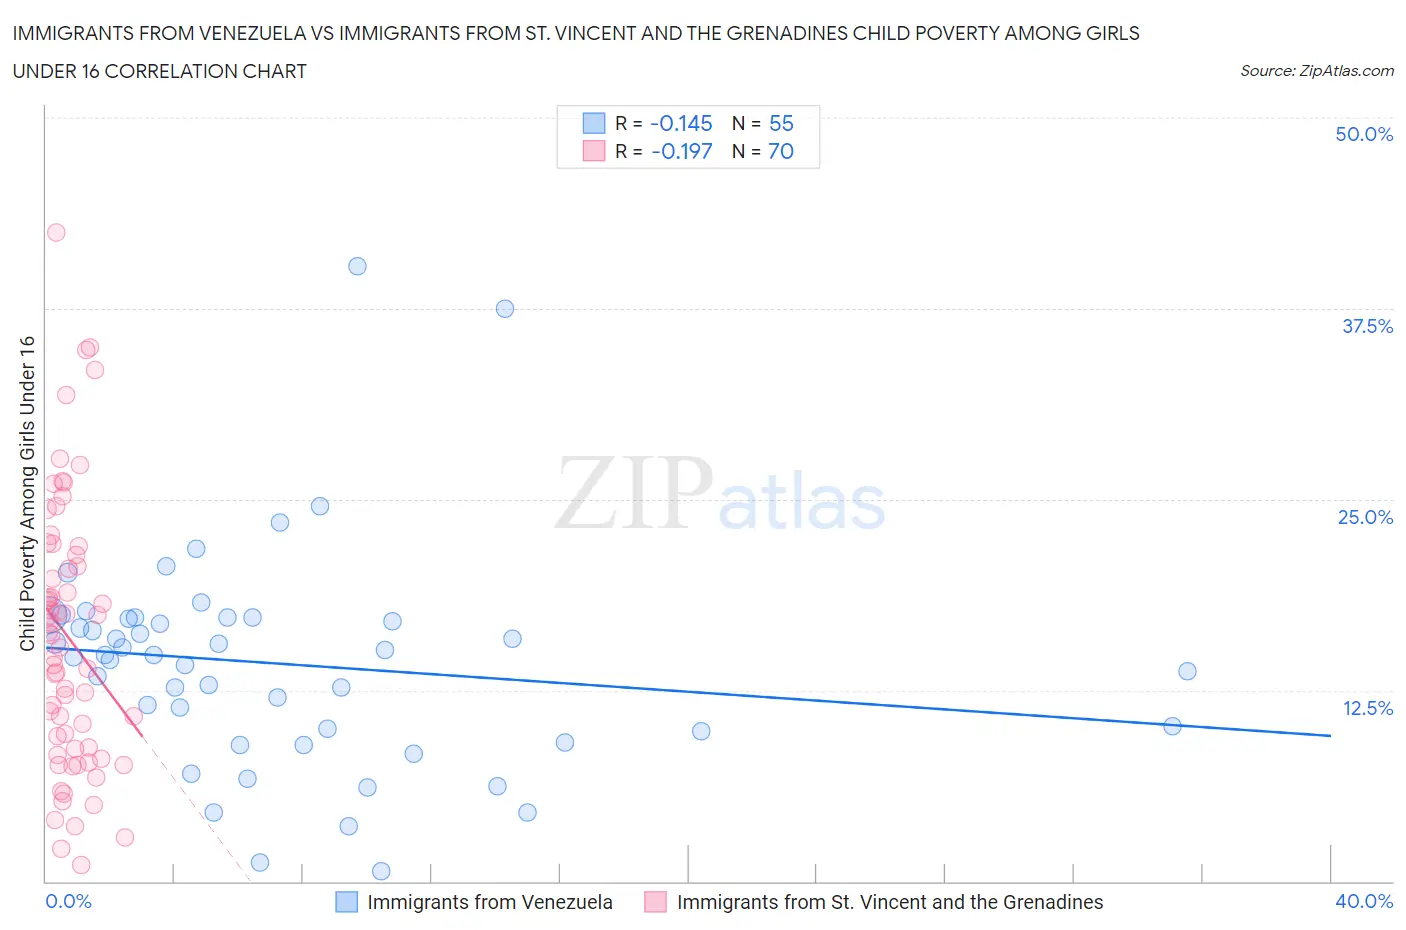 Immigrants from Venezuela vs Immigrants from St. Vincent and the Grenadines Child Poverty Among Girls Under 16